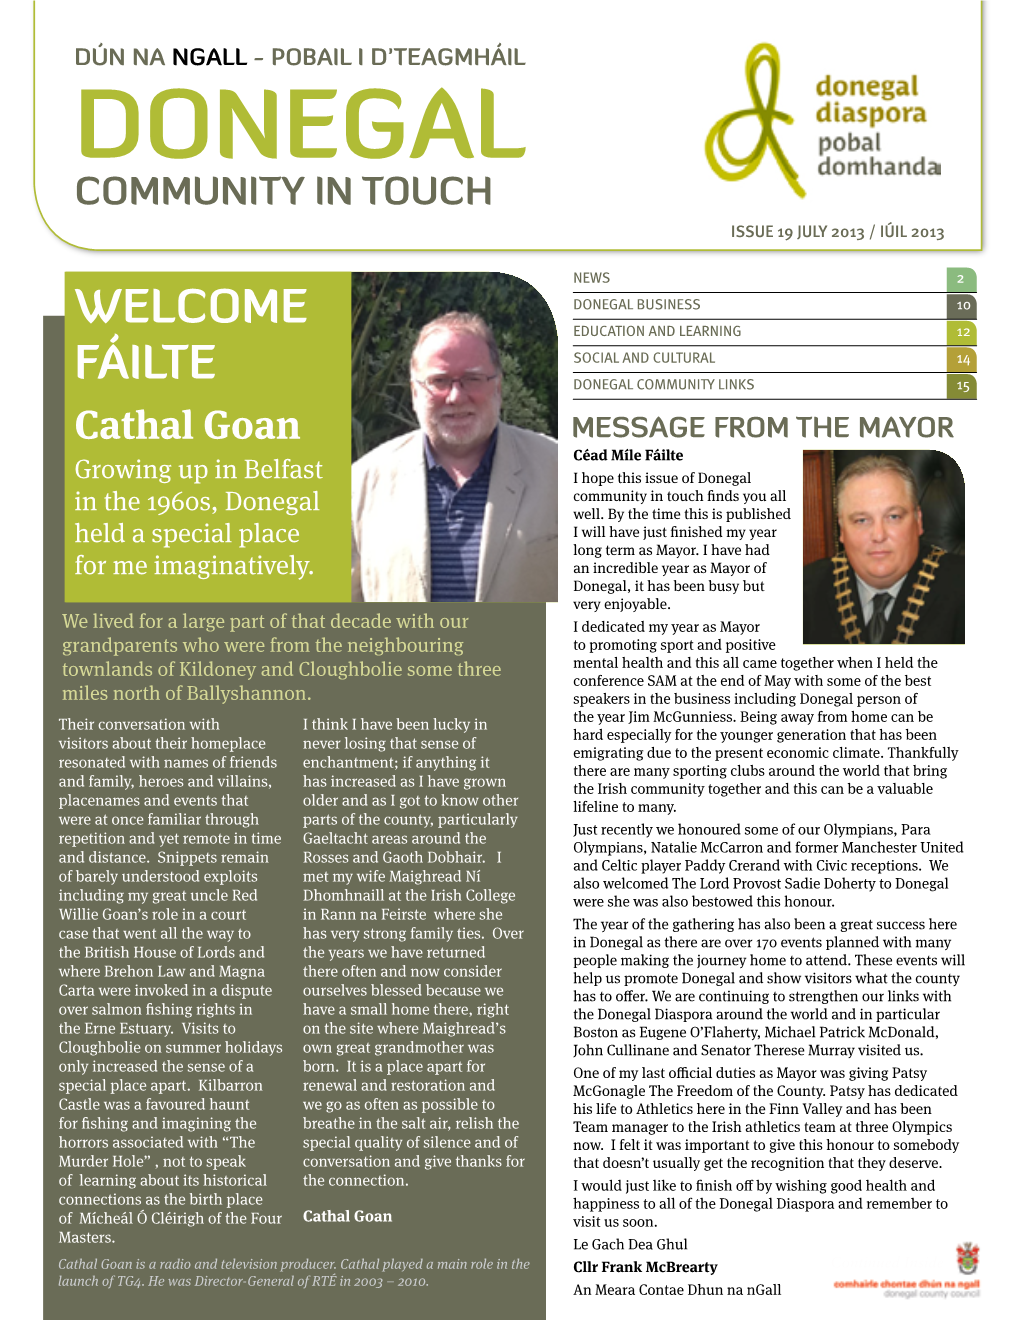 Donegal Community in Touch Ezine